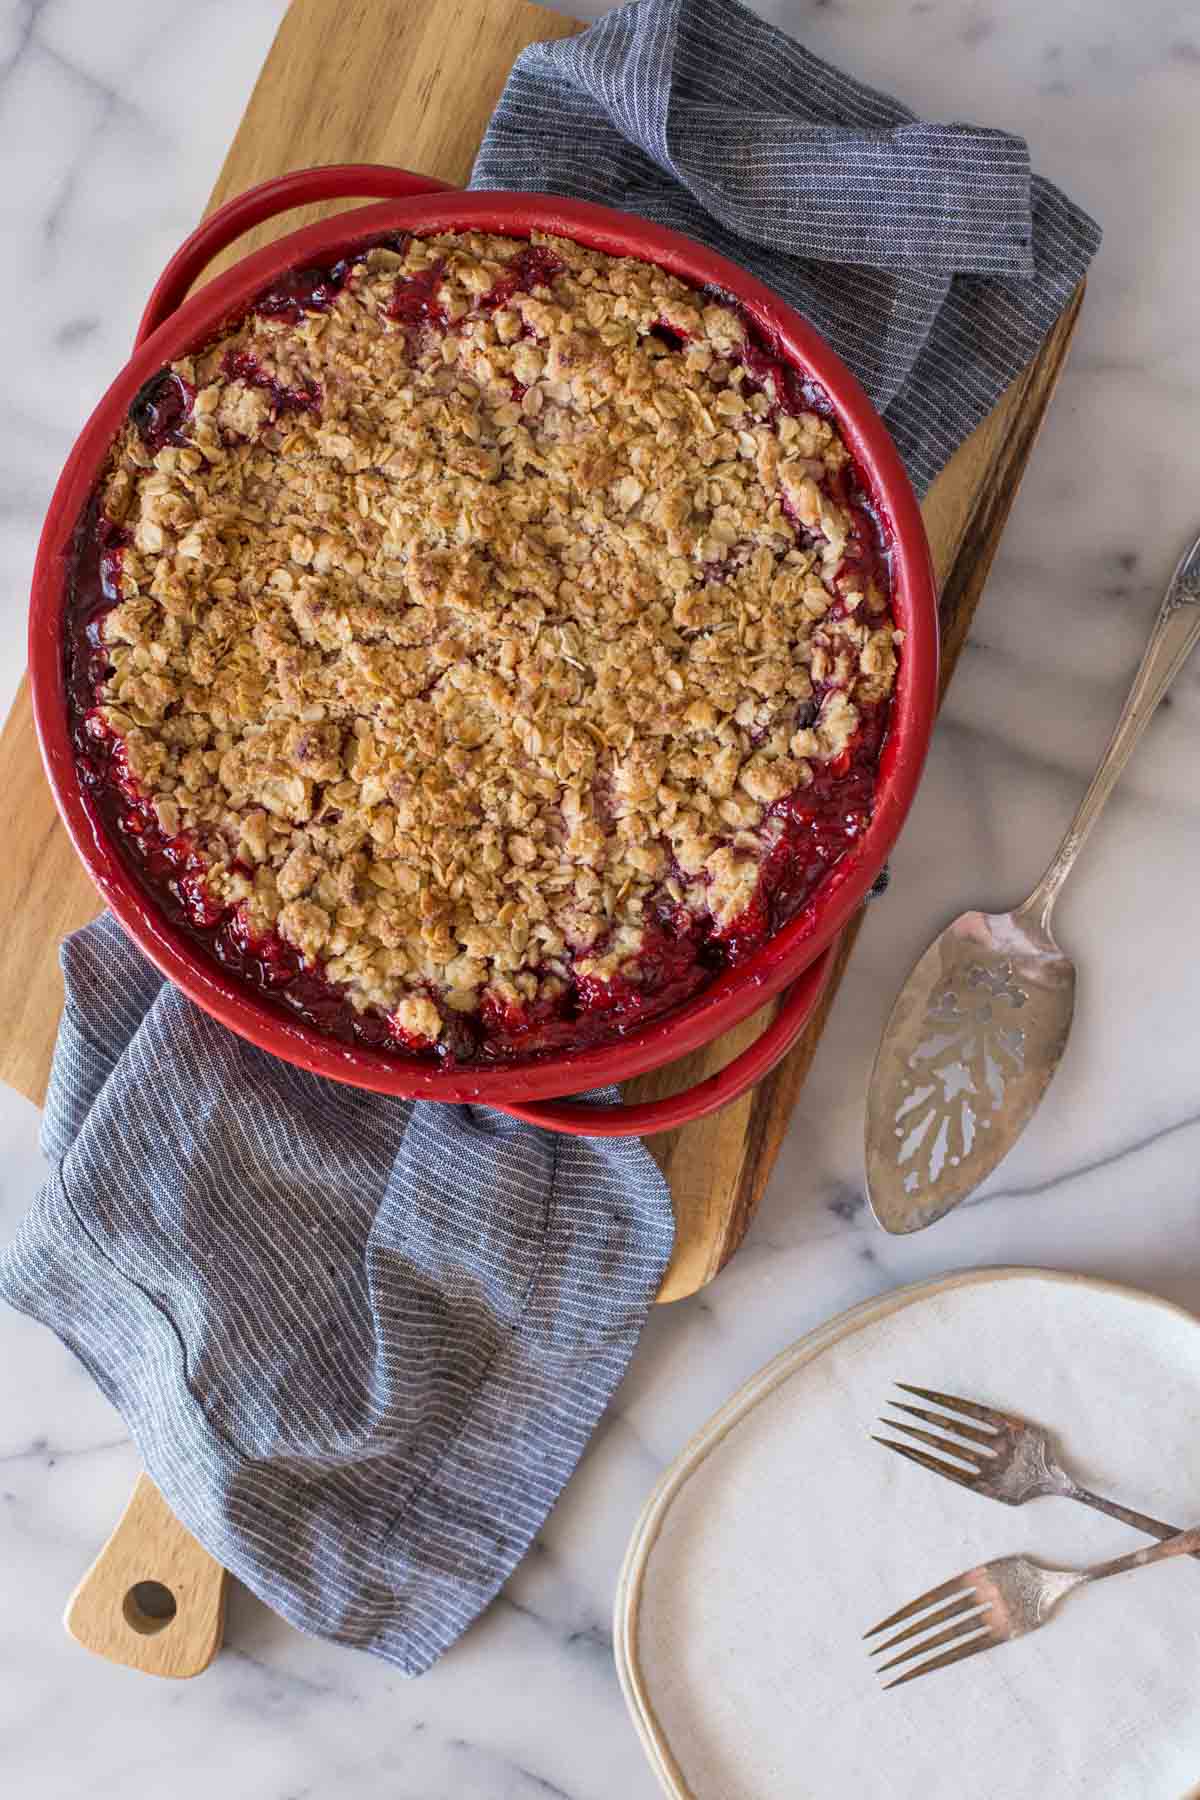 Overhead shot of a whole Berry Crumble Pie on a wooden cutting board.  